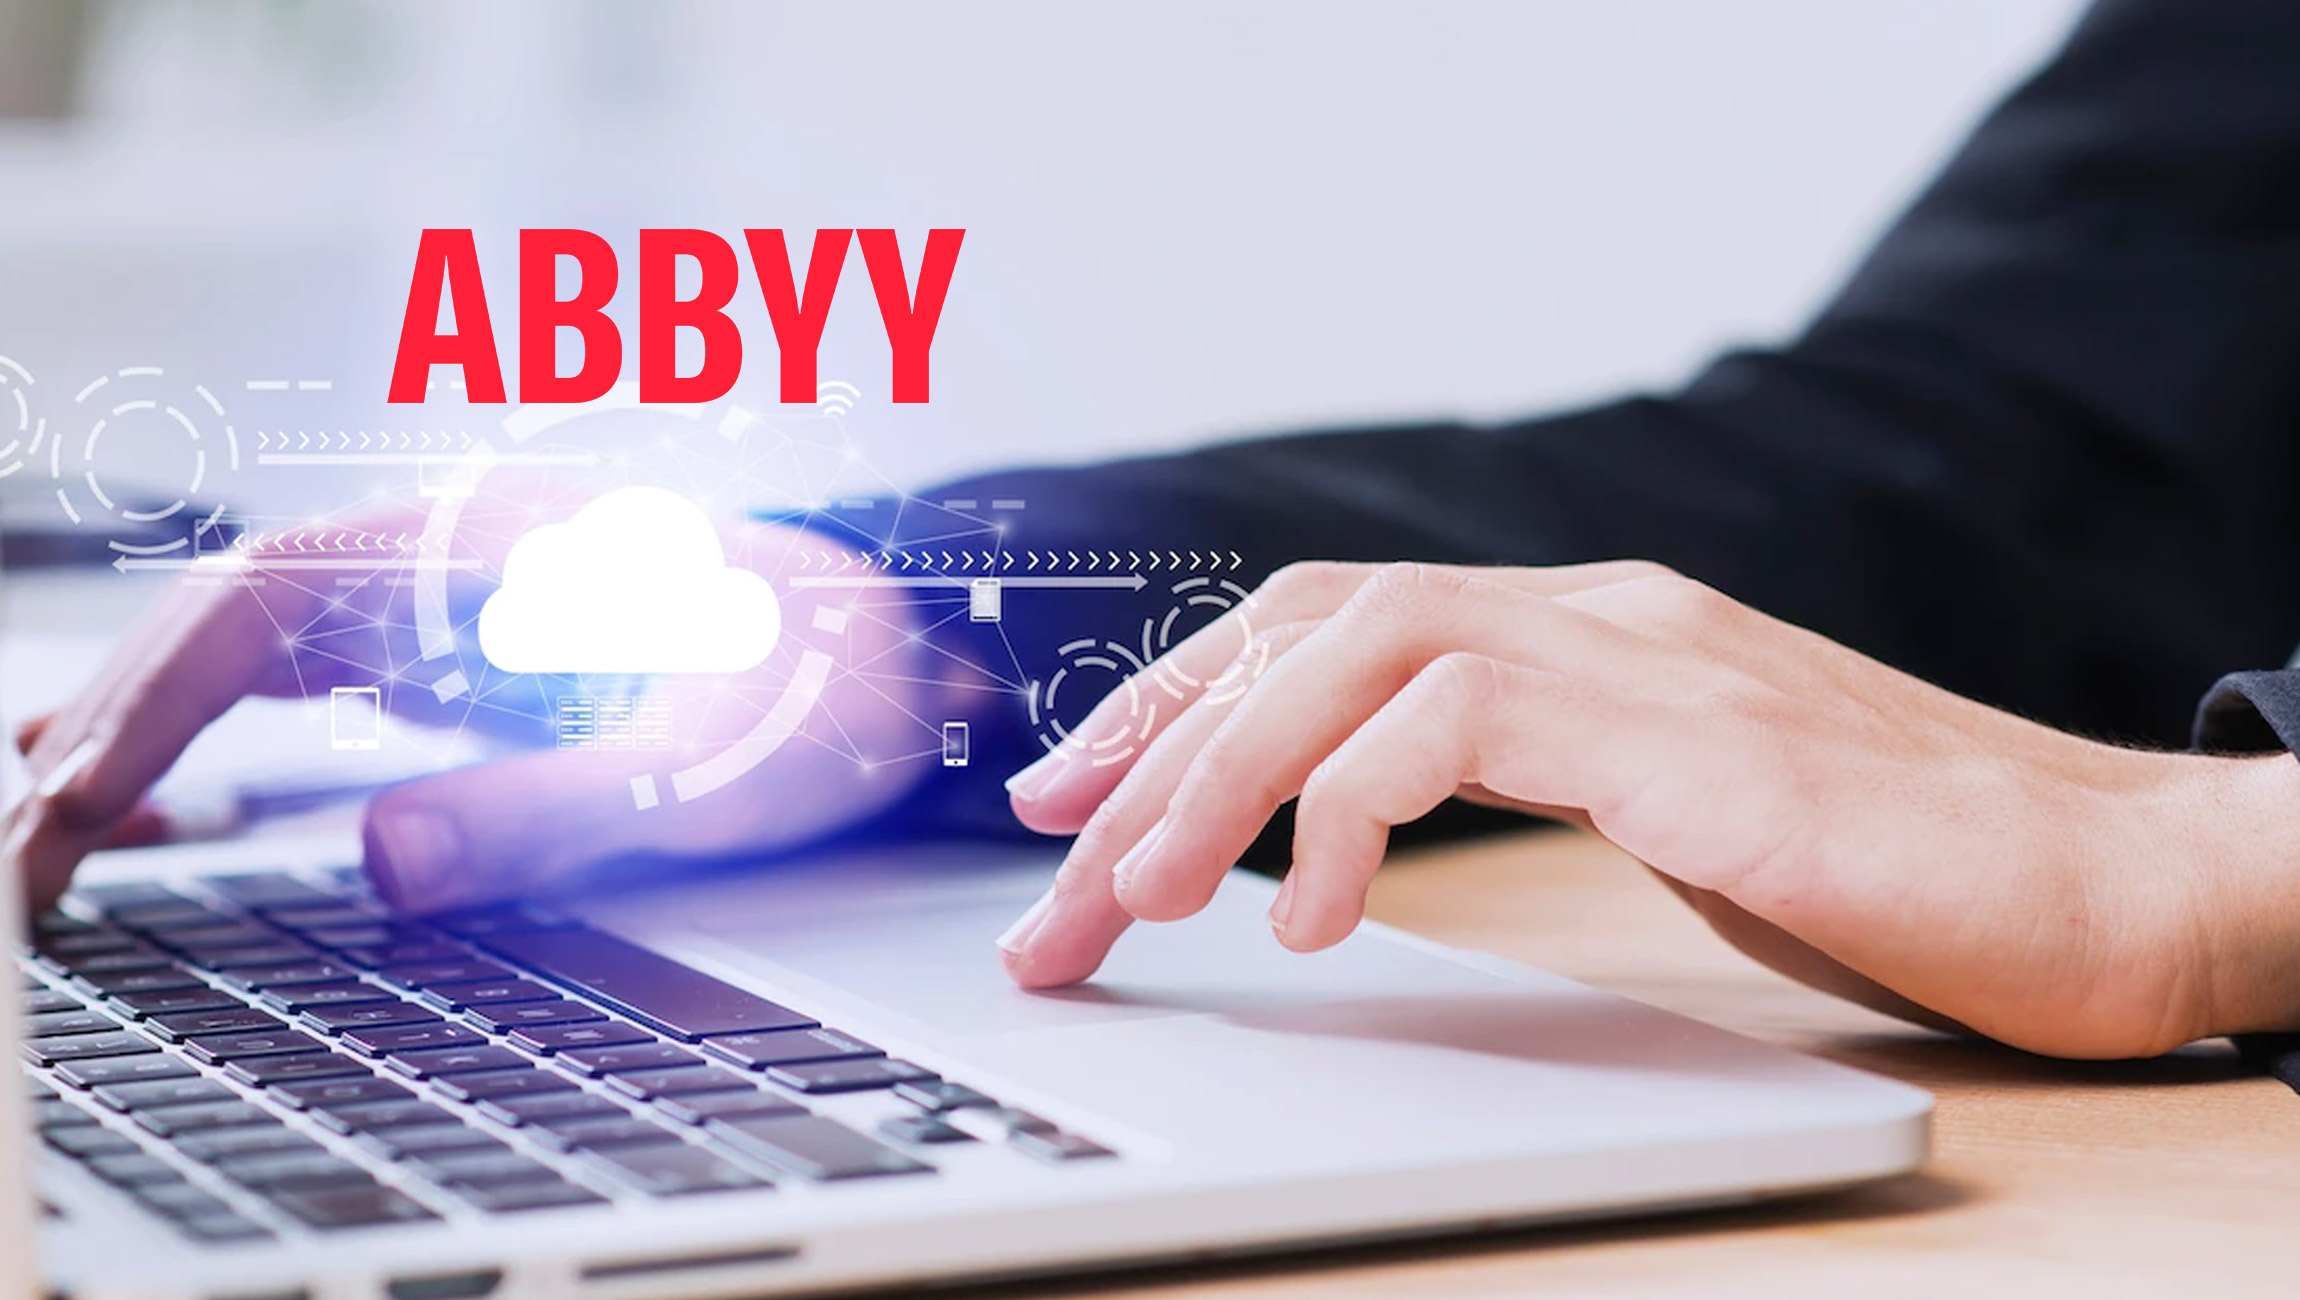 ABBYY Reaffirms Its Position as an Intelligent Automation Market Leader